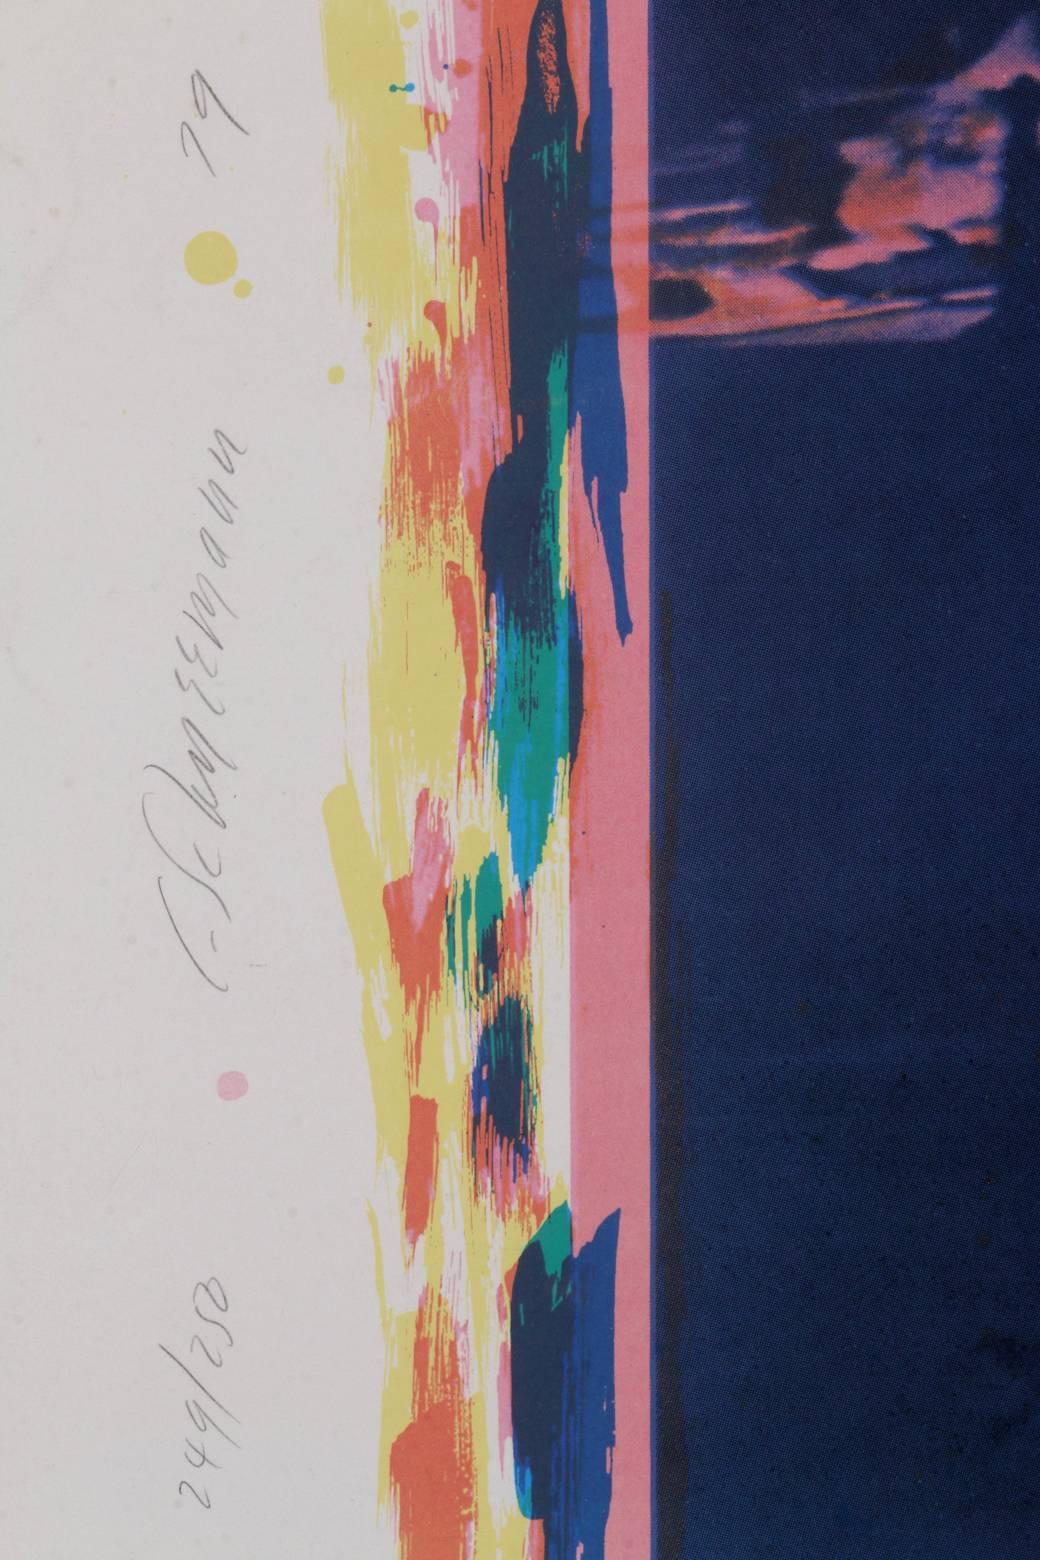 Original Kinetic, feminist graphic artwork by Carolee Schneemann has a hand-written story written around a large image of a group seated at a table that is surrounded by and layered with translucent vibrant colors of purple, yellow, green, pink and